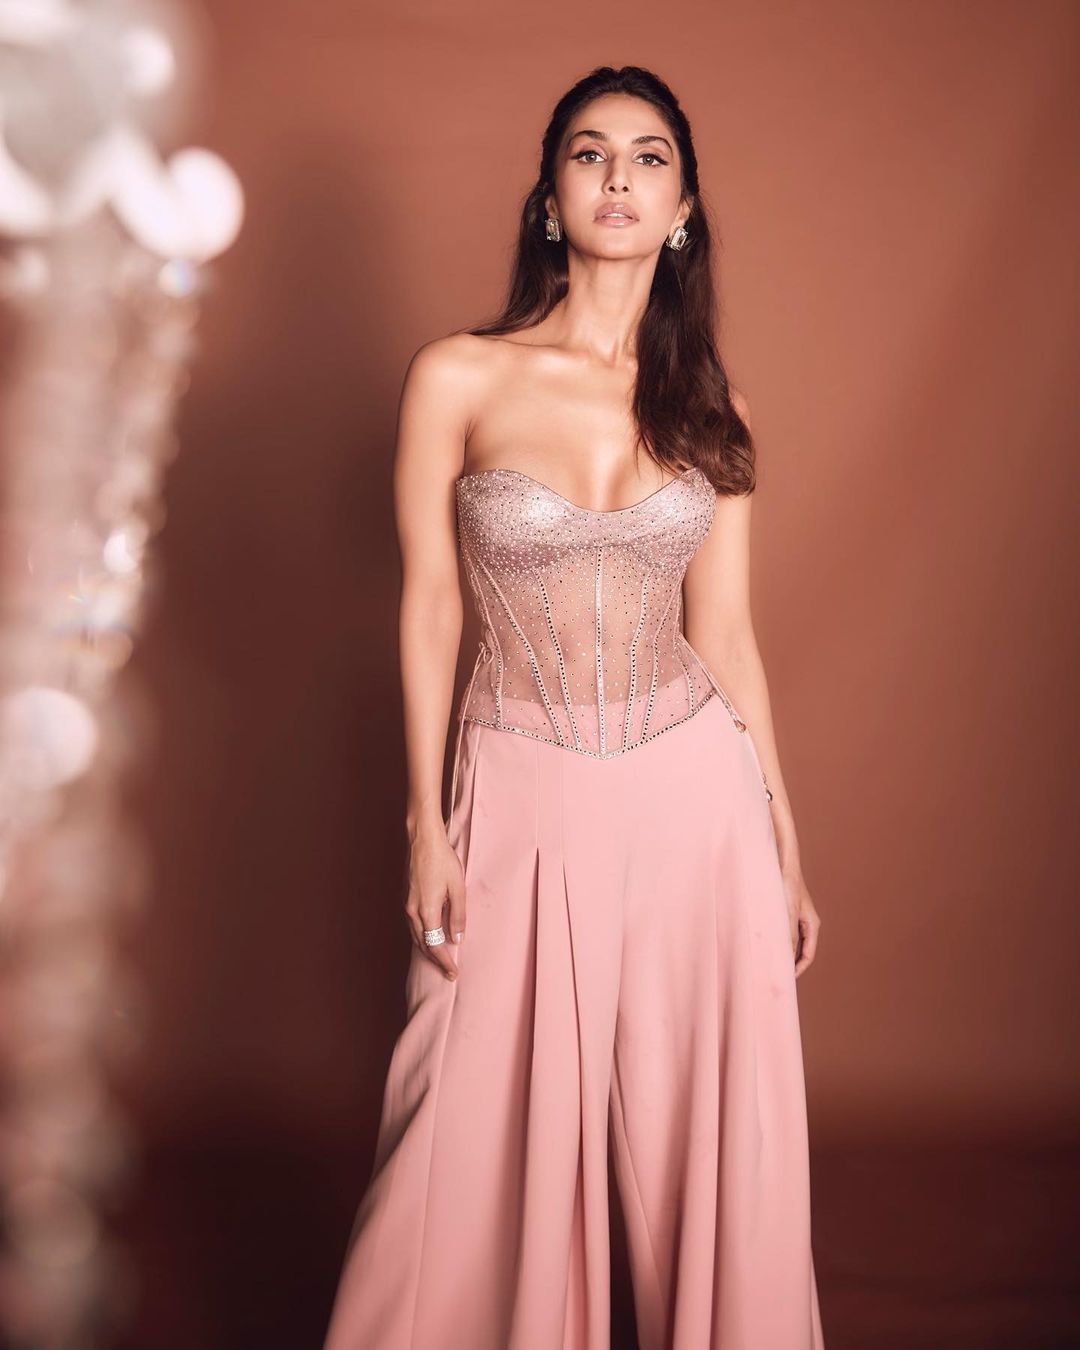 Vaani Kapoor oozes oomph in the see-through corset top and pink pants.